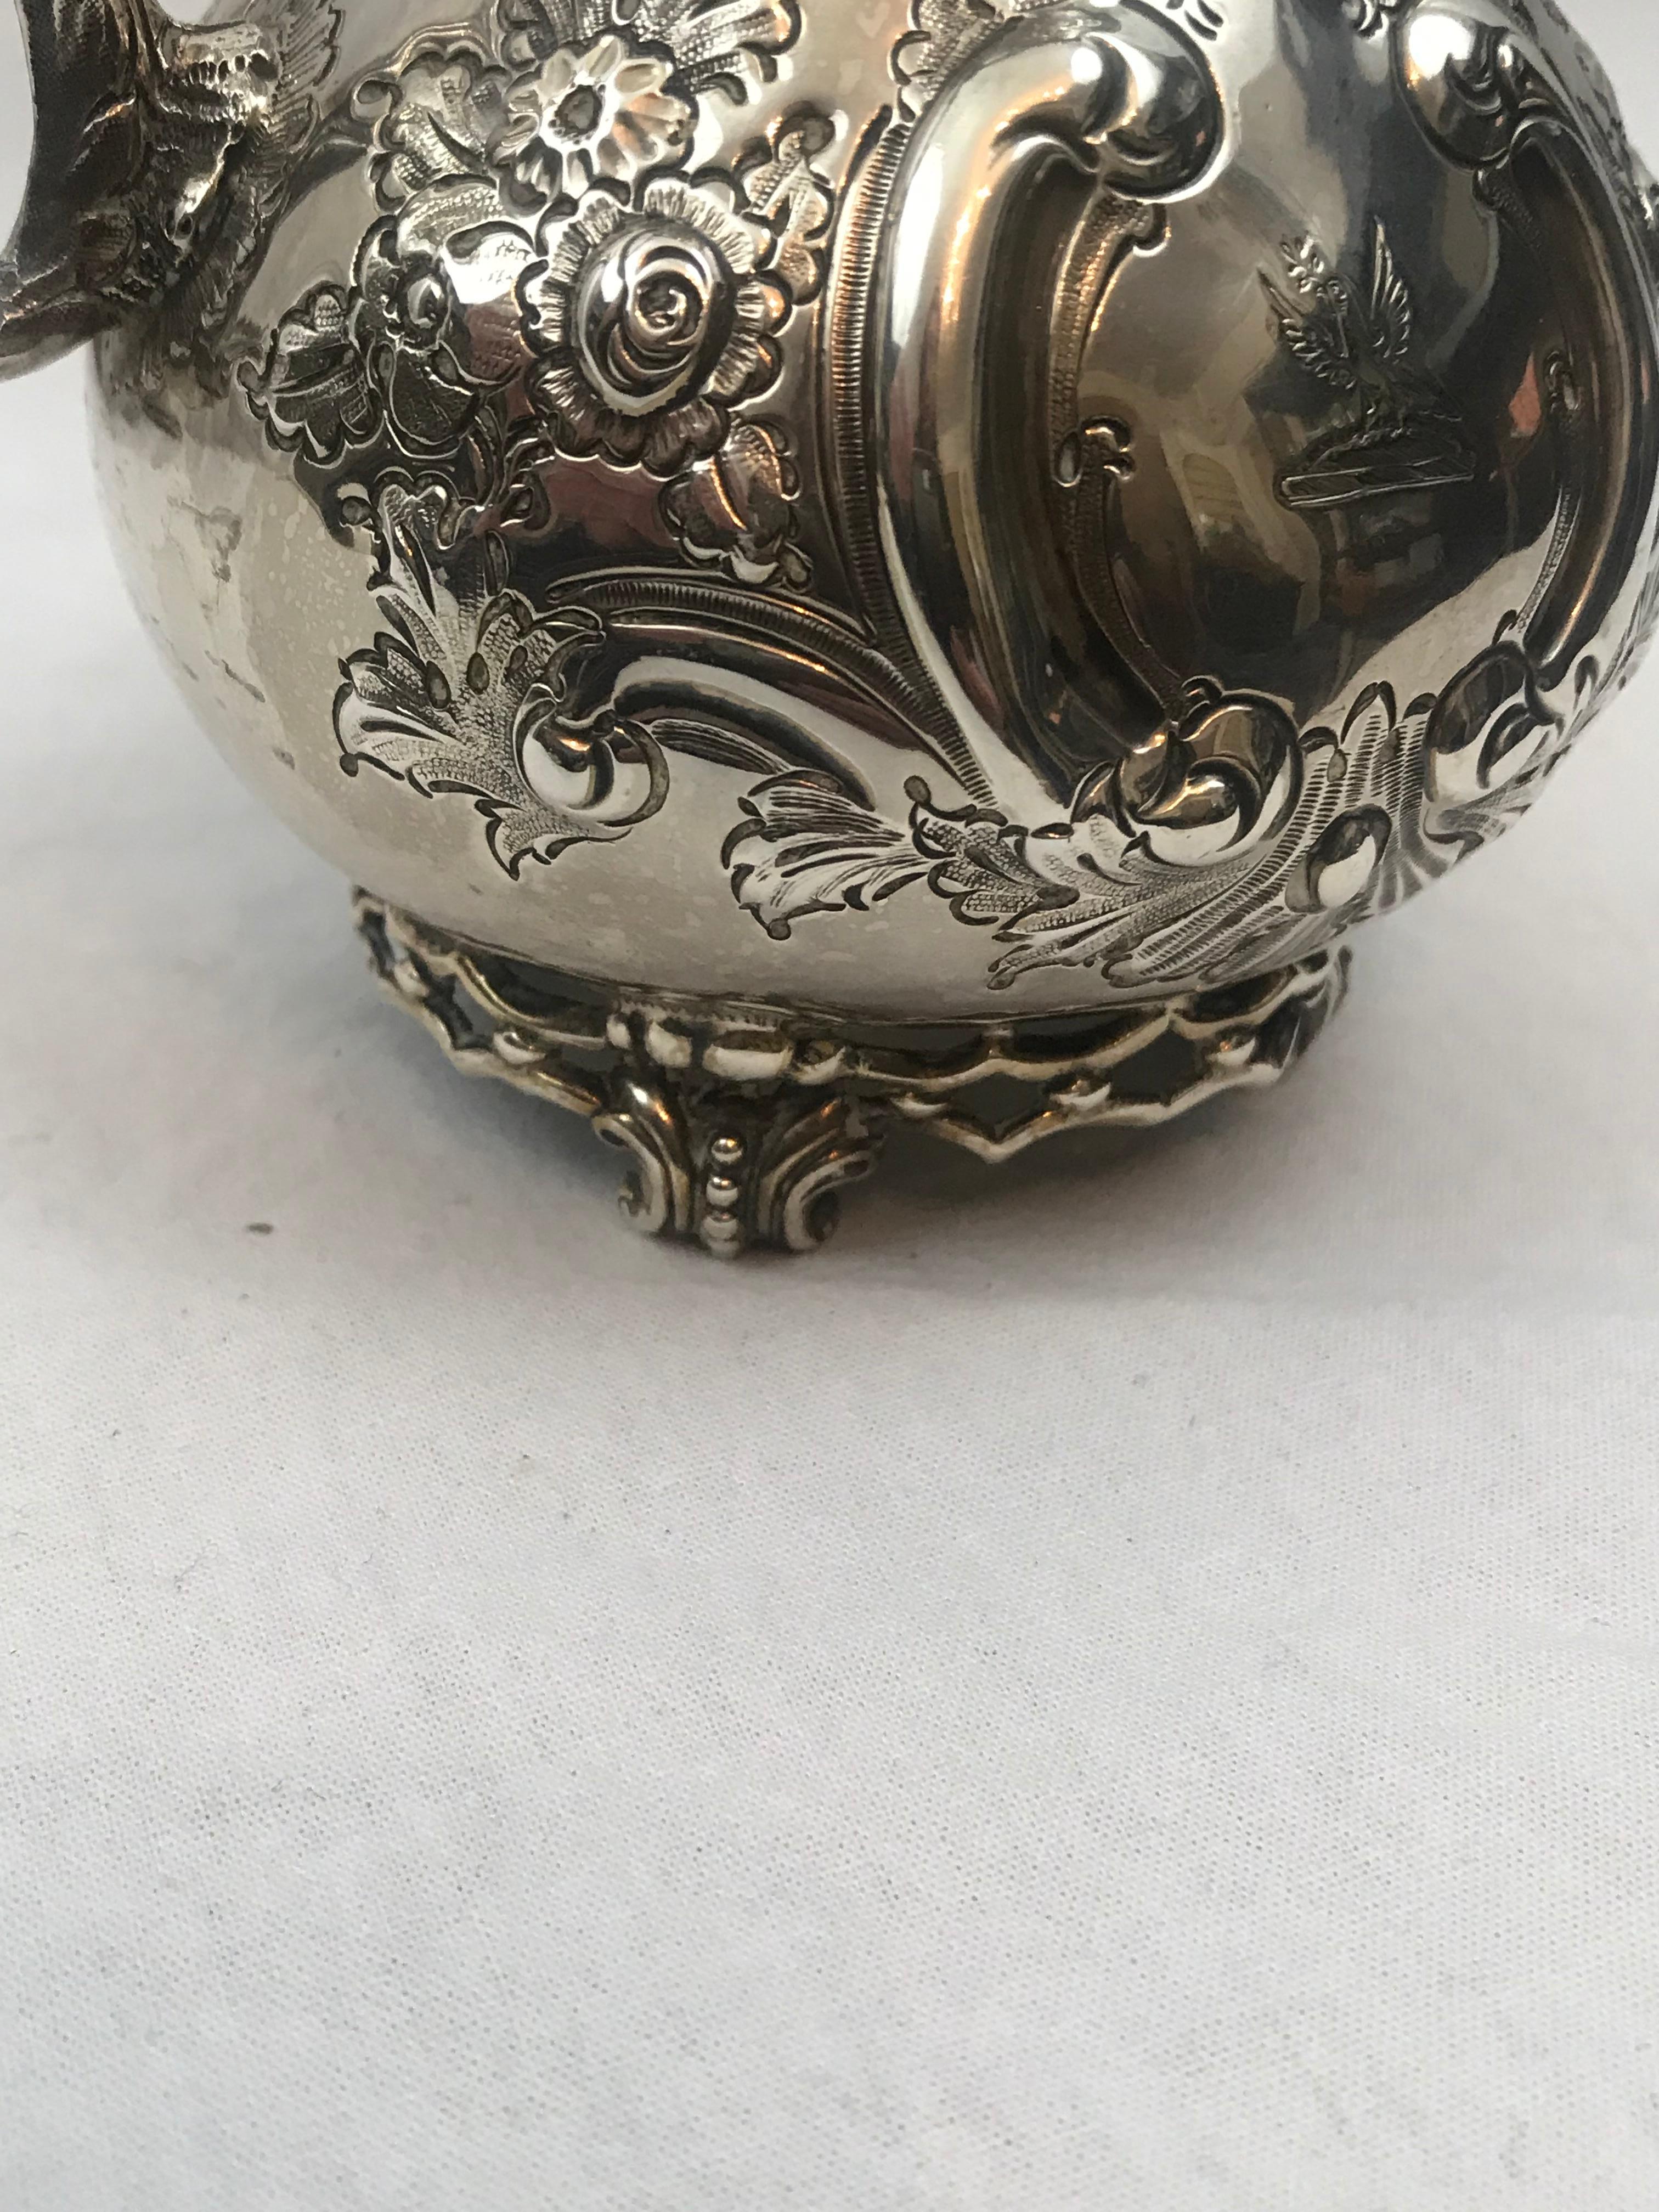 Lovely large-size cream and sugar. Irish sterling silver.
Date marks for Dublin 1887-1888.
 
Repousse roses and leaves. Engraved crest of a bird. Pierced gallery at foot.
 
Sugar bowl. 9